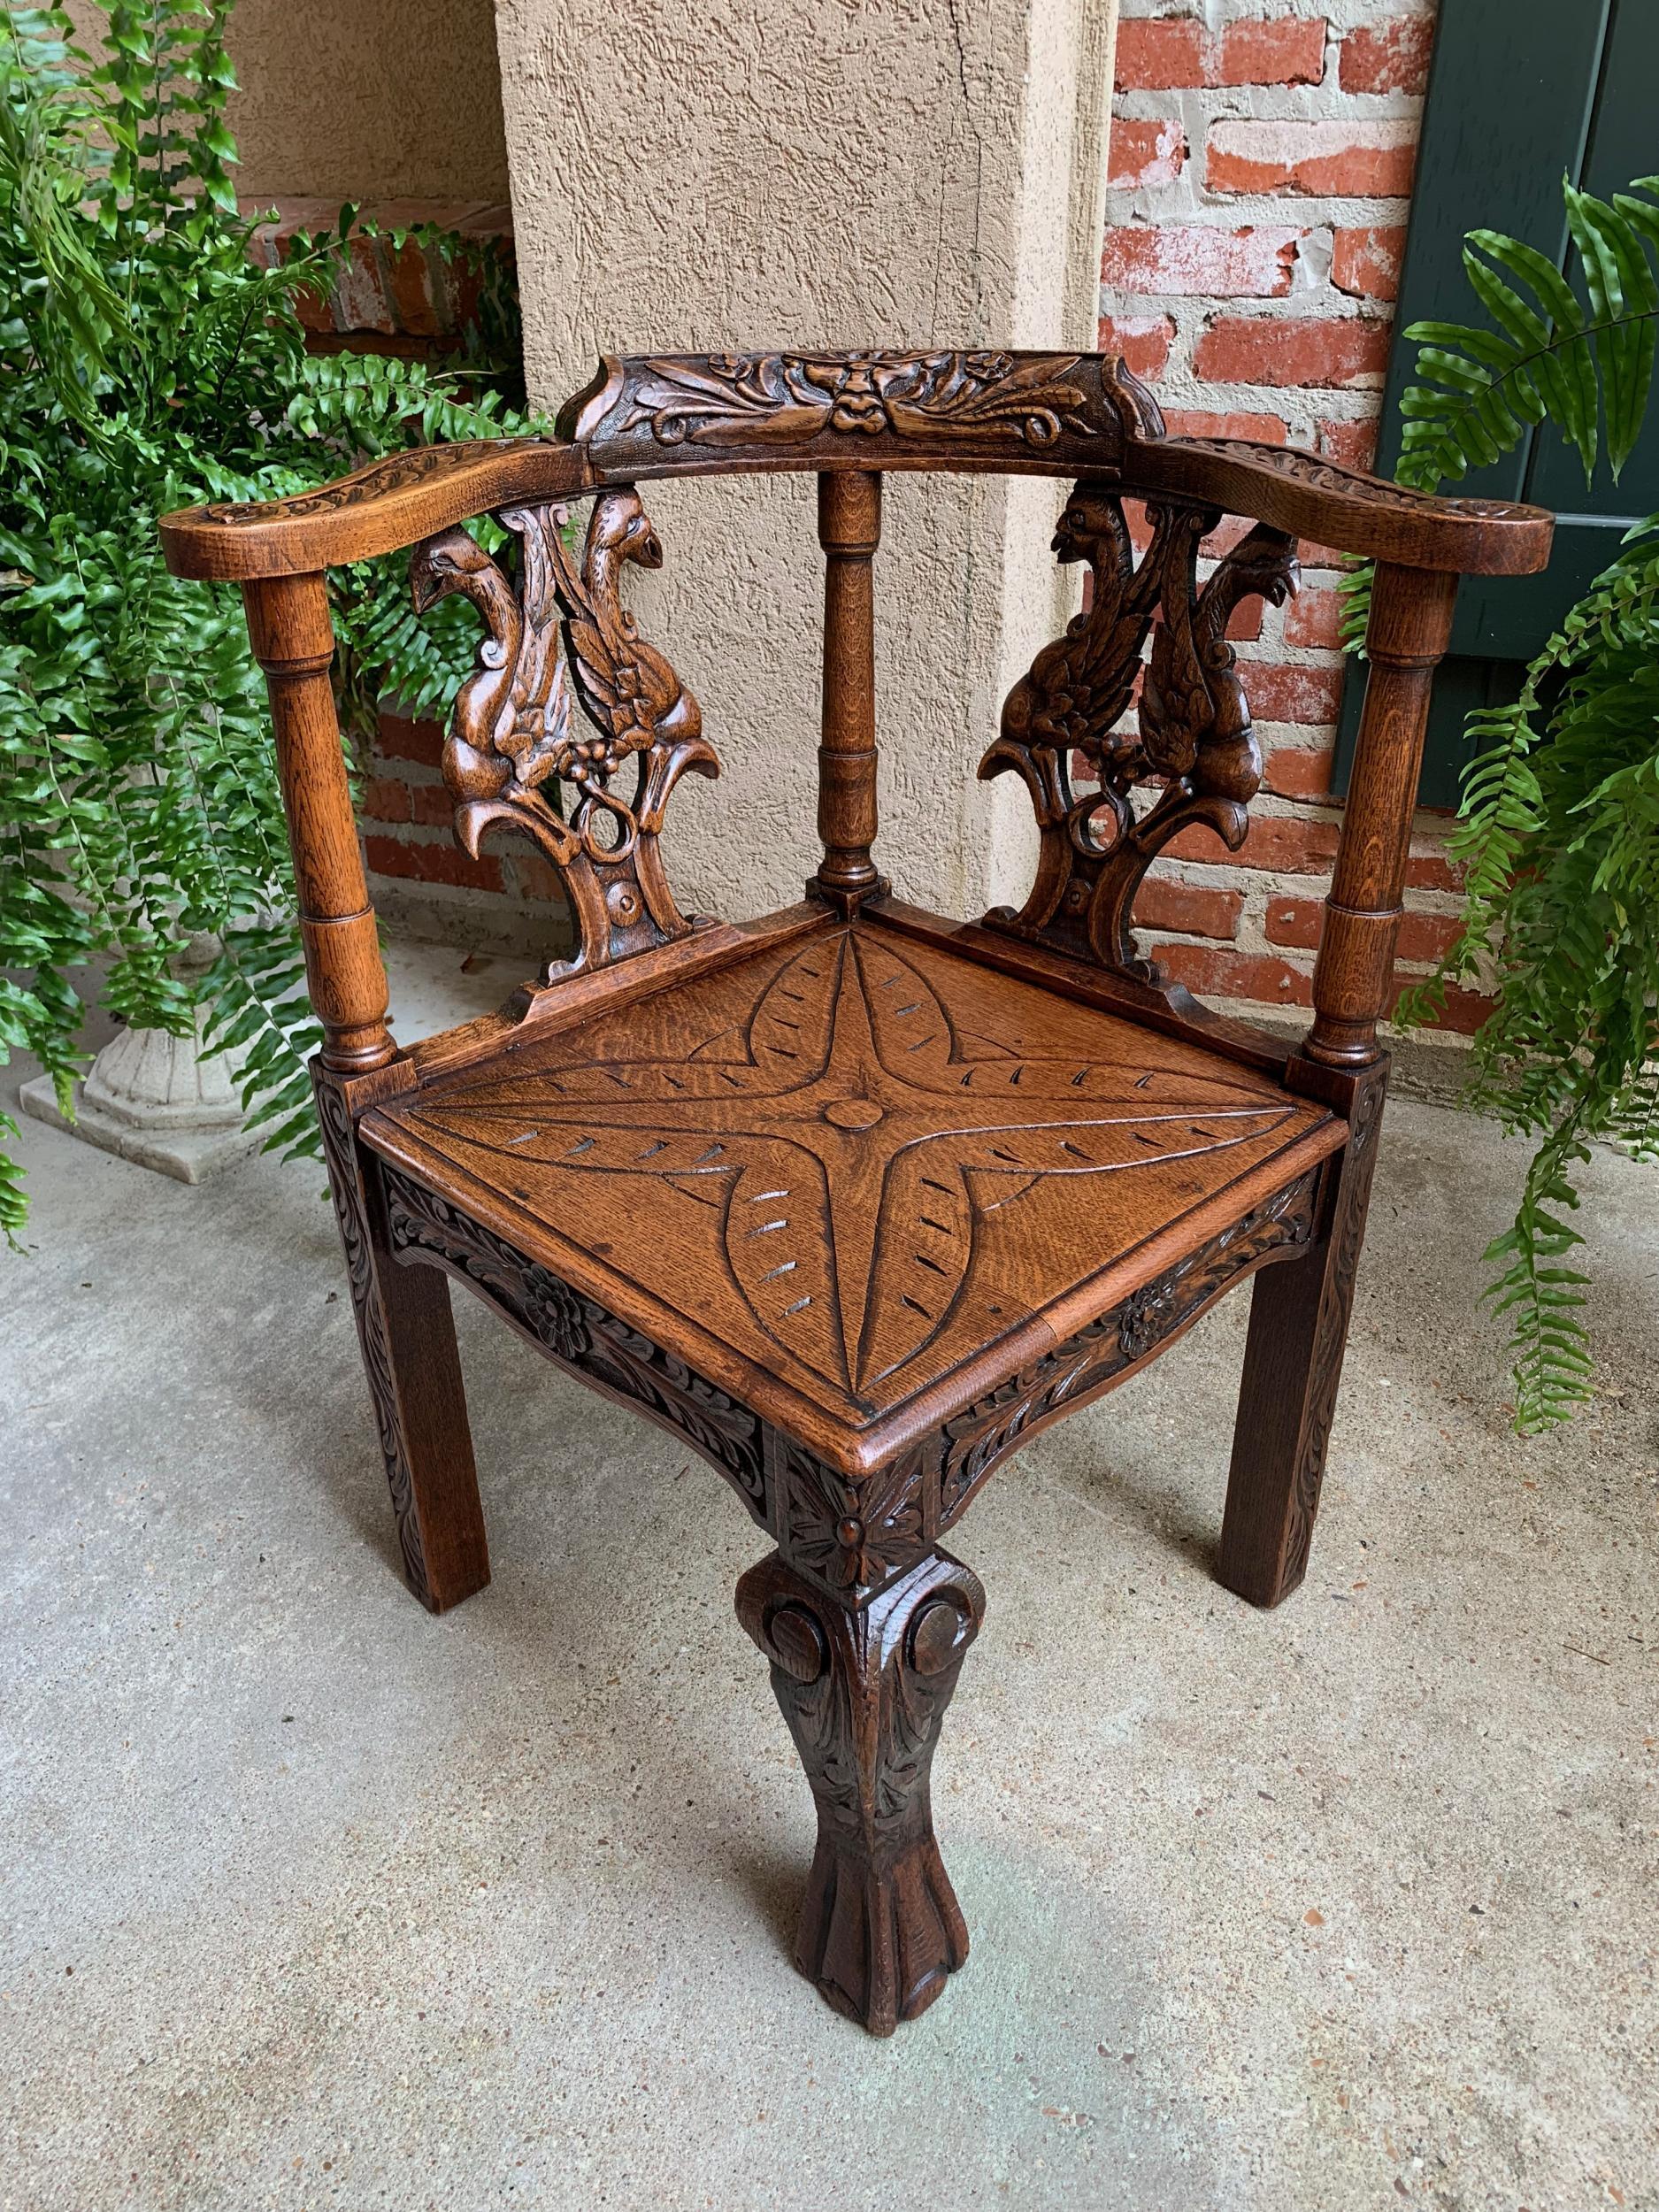 Antique French carved oak corner arm chair Renaissance Louis XIV style

~Direct from France~
~Beautiful carving throughout this versatile antique French corner chair~
~Carved mask to the chair back and carved tops on the serpentine arms~
~Large,